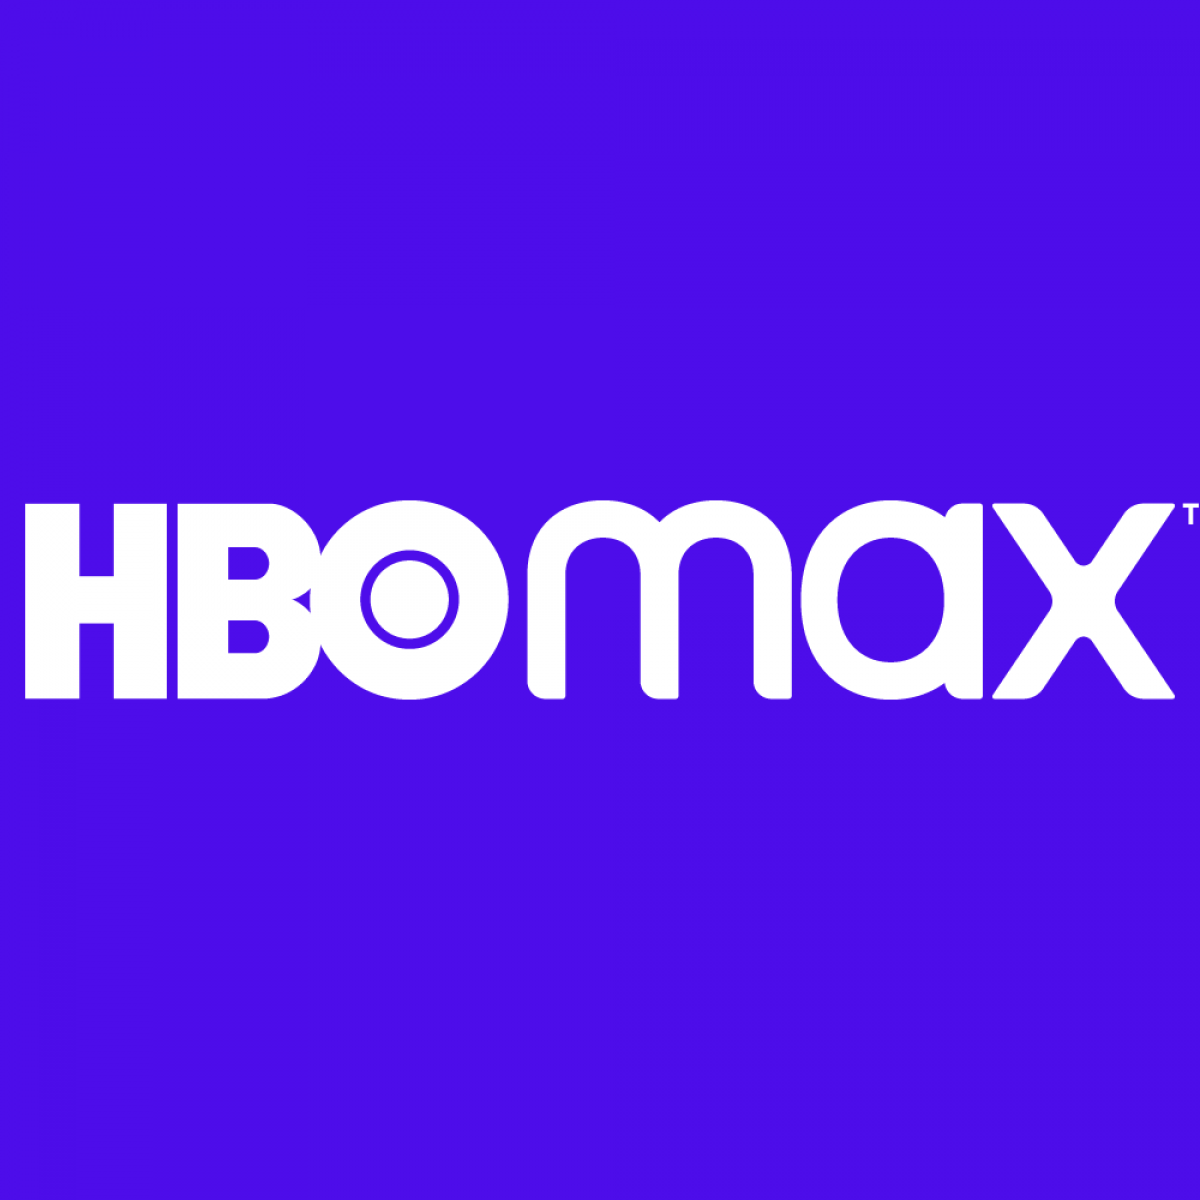 Combined HBO Max/Discovery+ service gets an earlier launch date, price hike  is to be expected